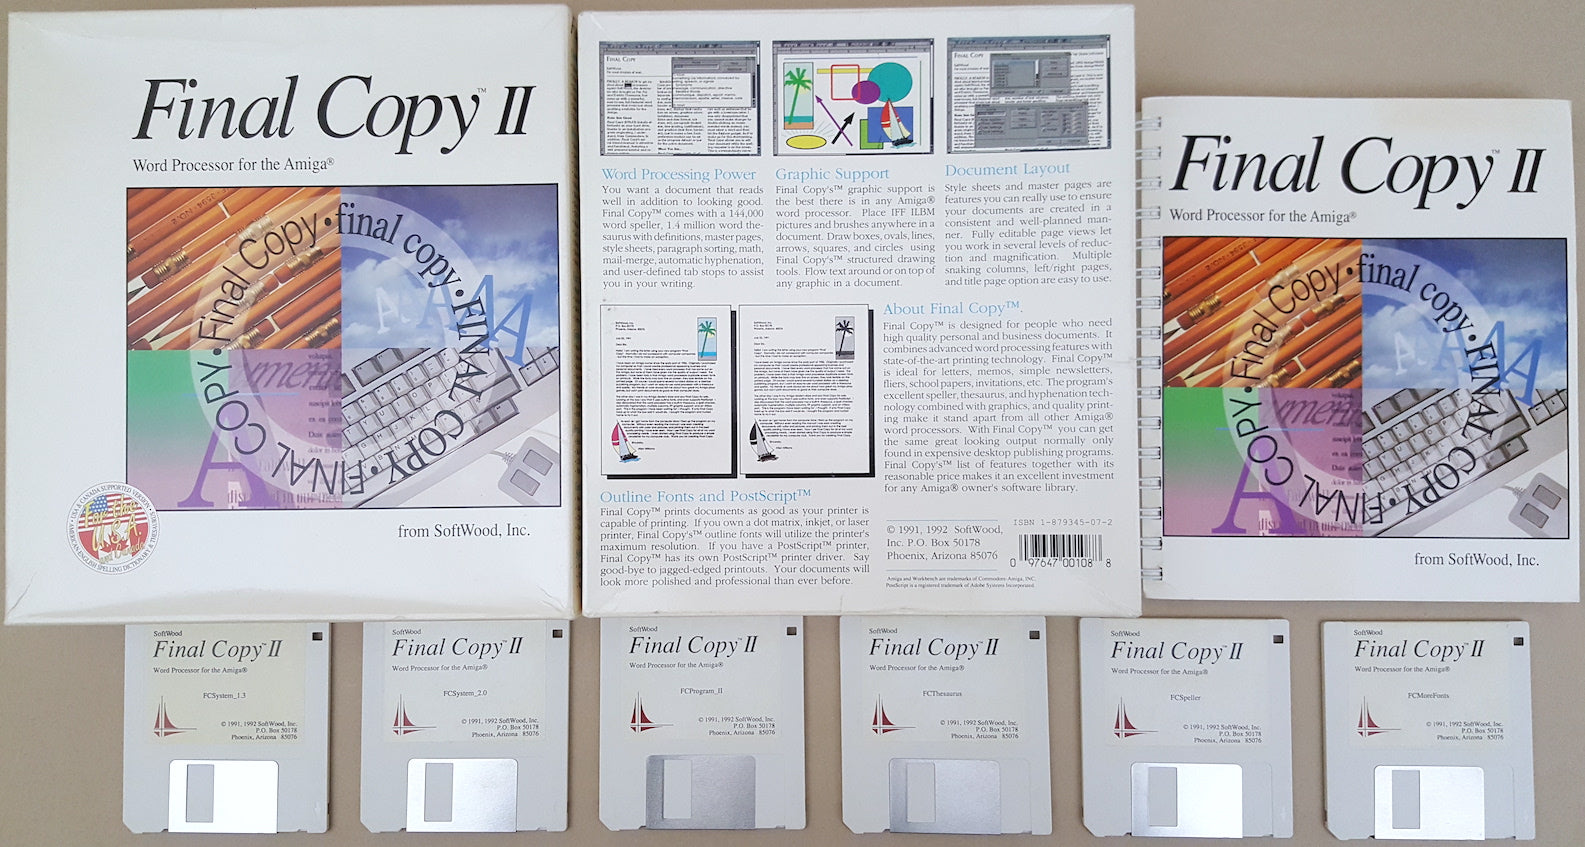 Final Copy II Release 1 - 1992 SoftWood Word Processor for 